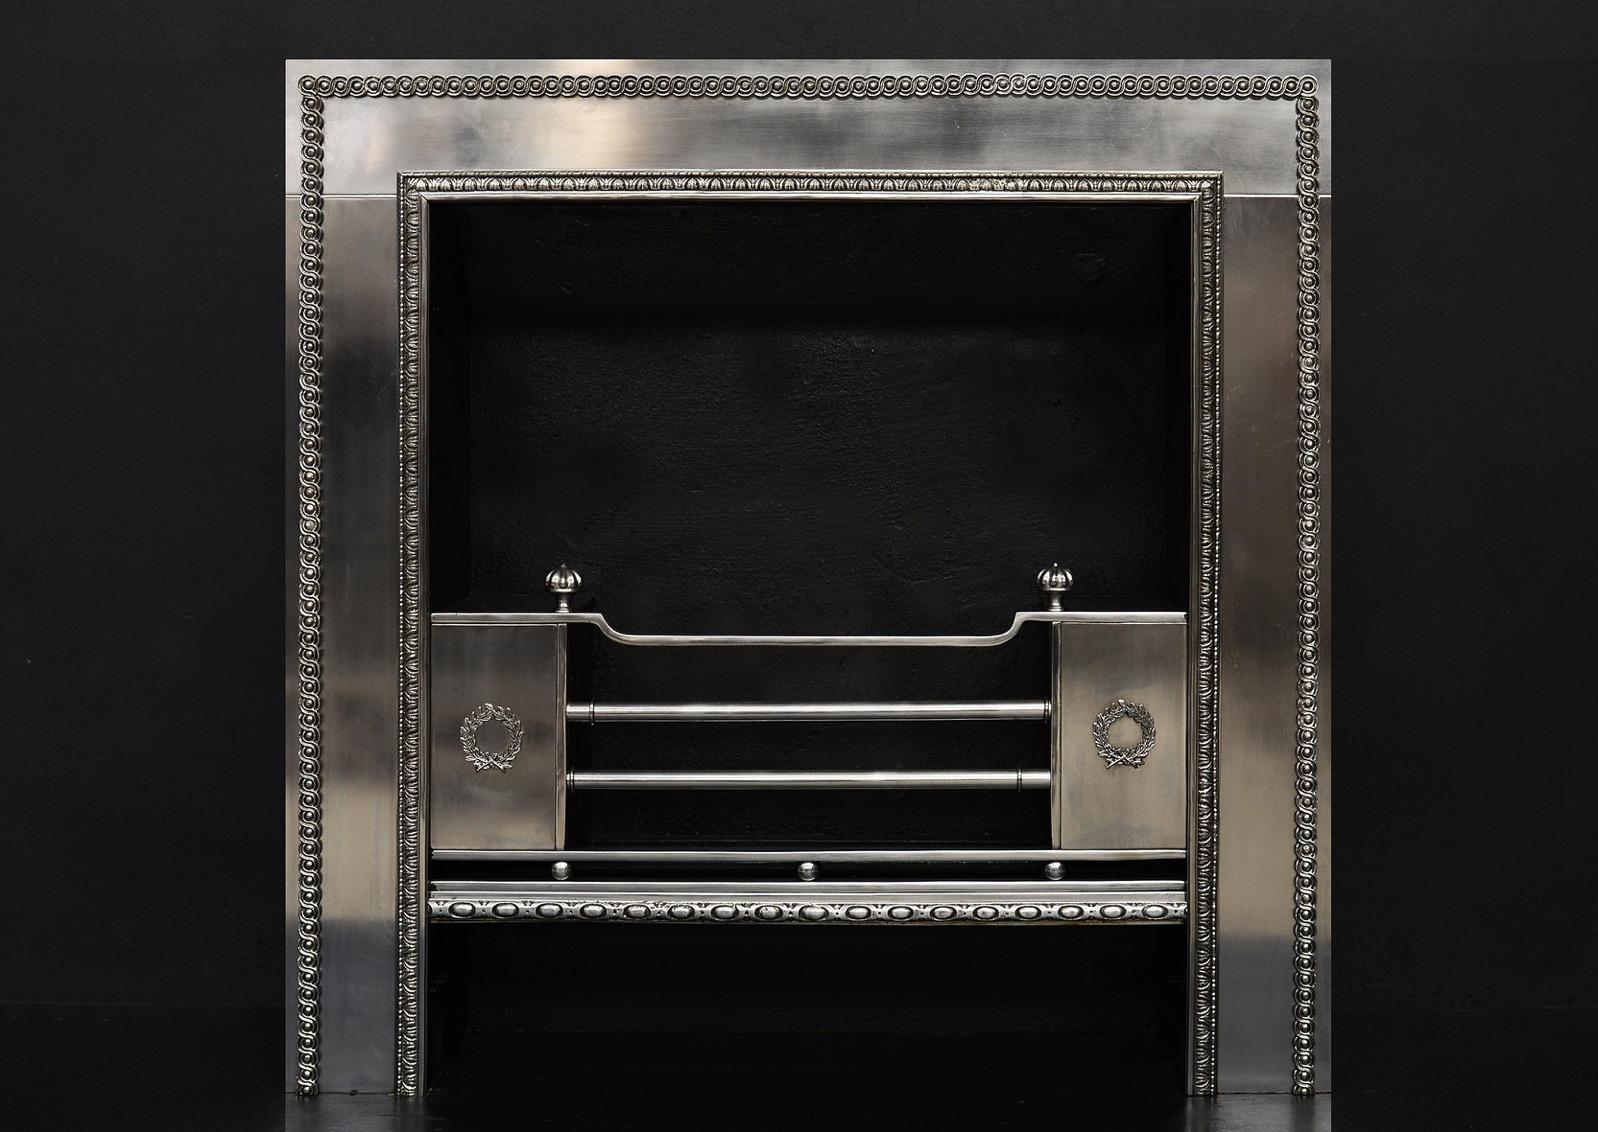 An elegant Regency style steel register grate with enrichments. Cast guilloche steel moulding to outer rim, and engraved leaf and pearl inner moulding. Laurel pattern to hob fronts. Modern.

Measures: Width at front: 1025 mm 40